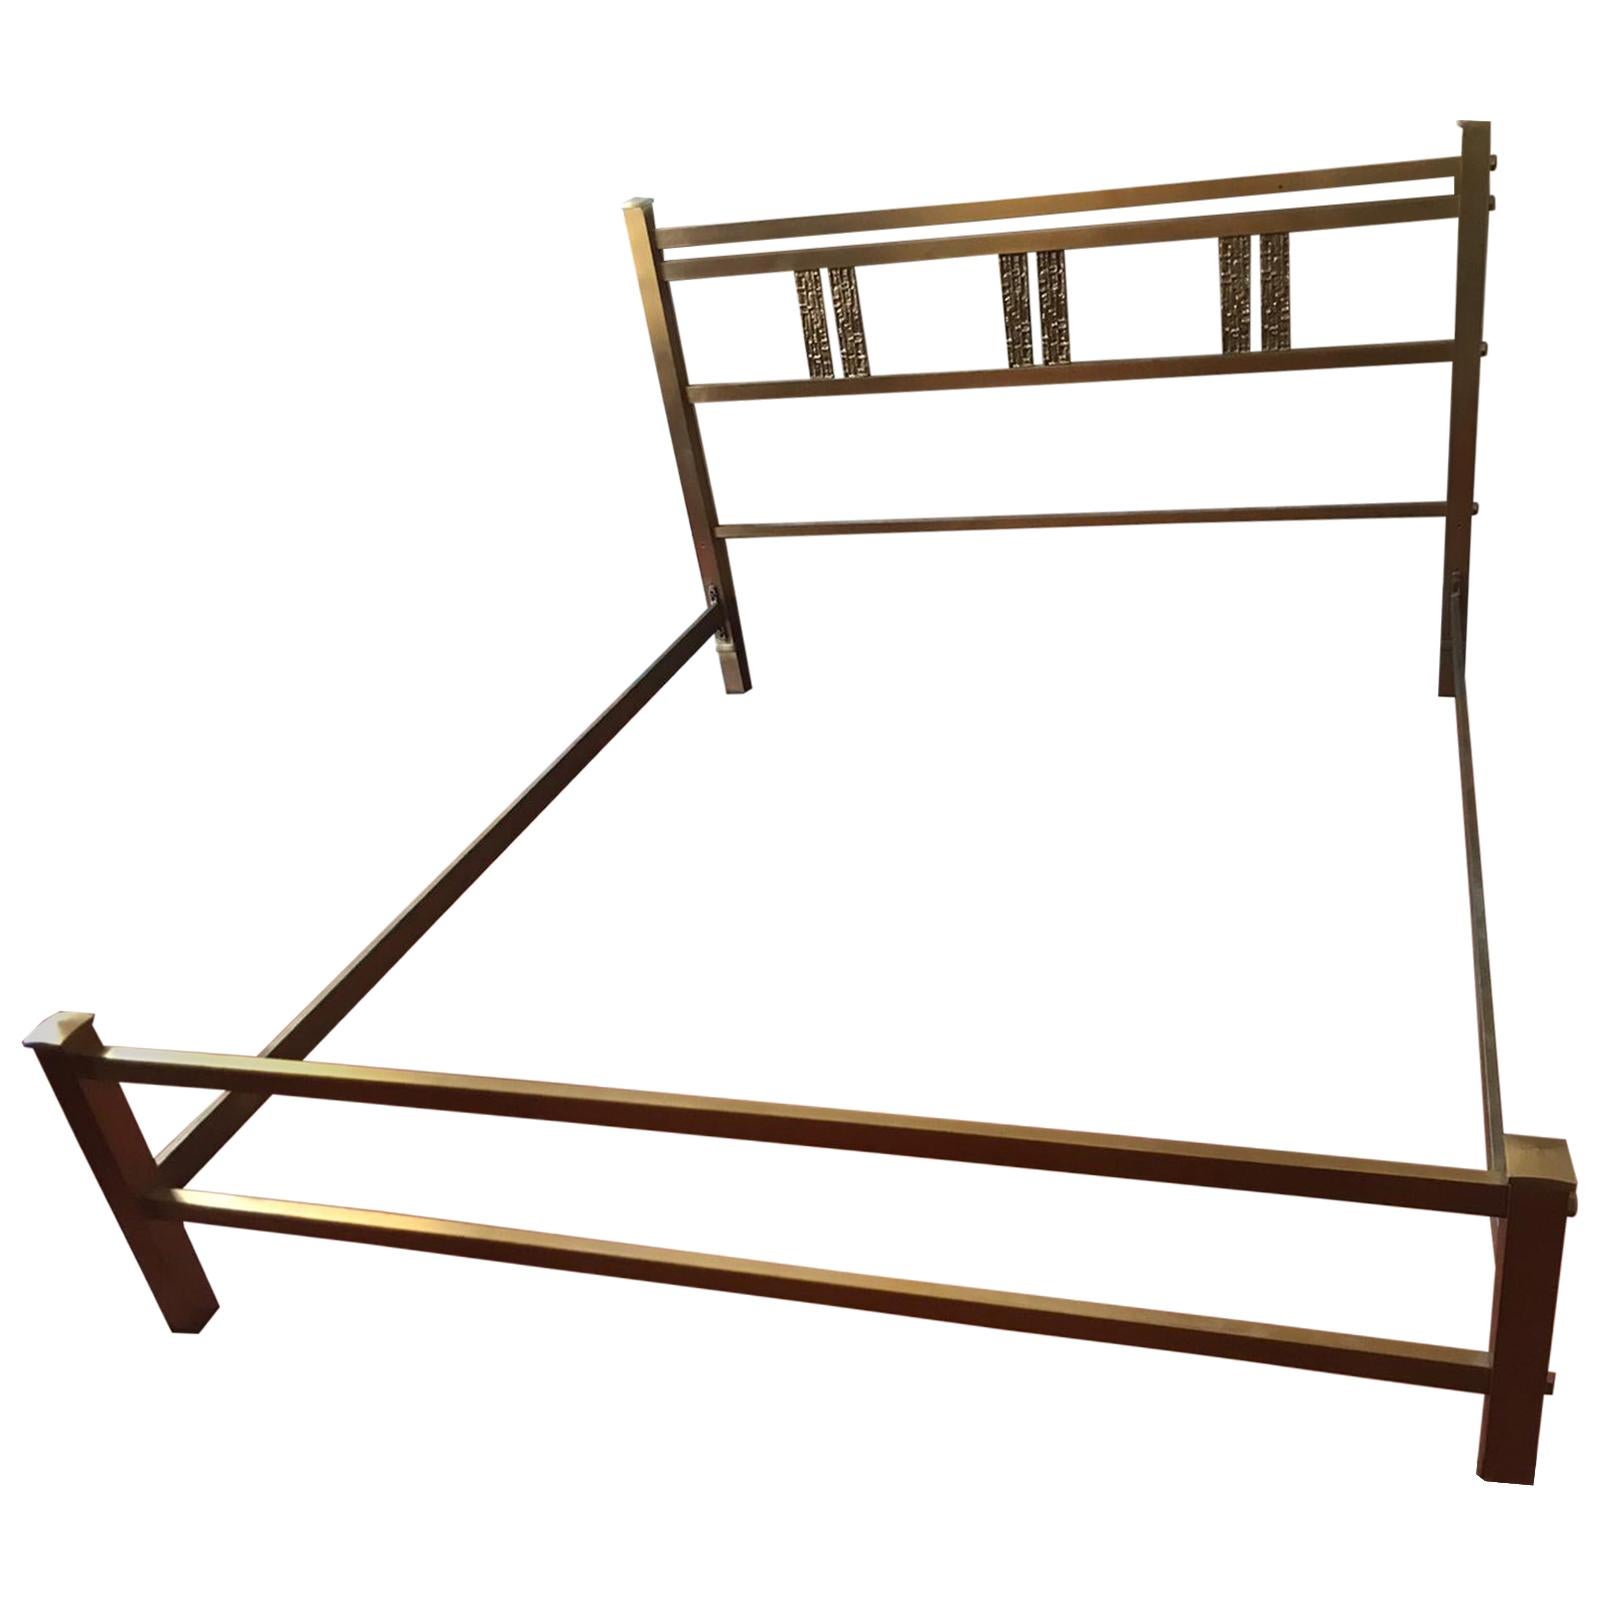 Italian Bed in Brass and Bronze by Luciano Frigerio, circa 1960